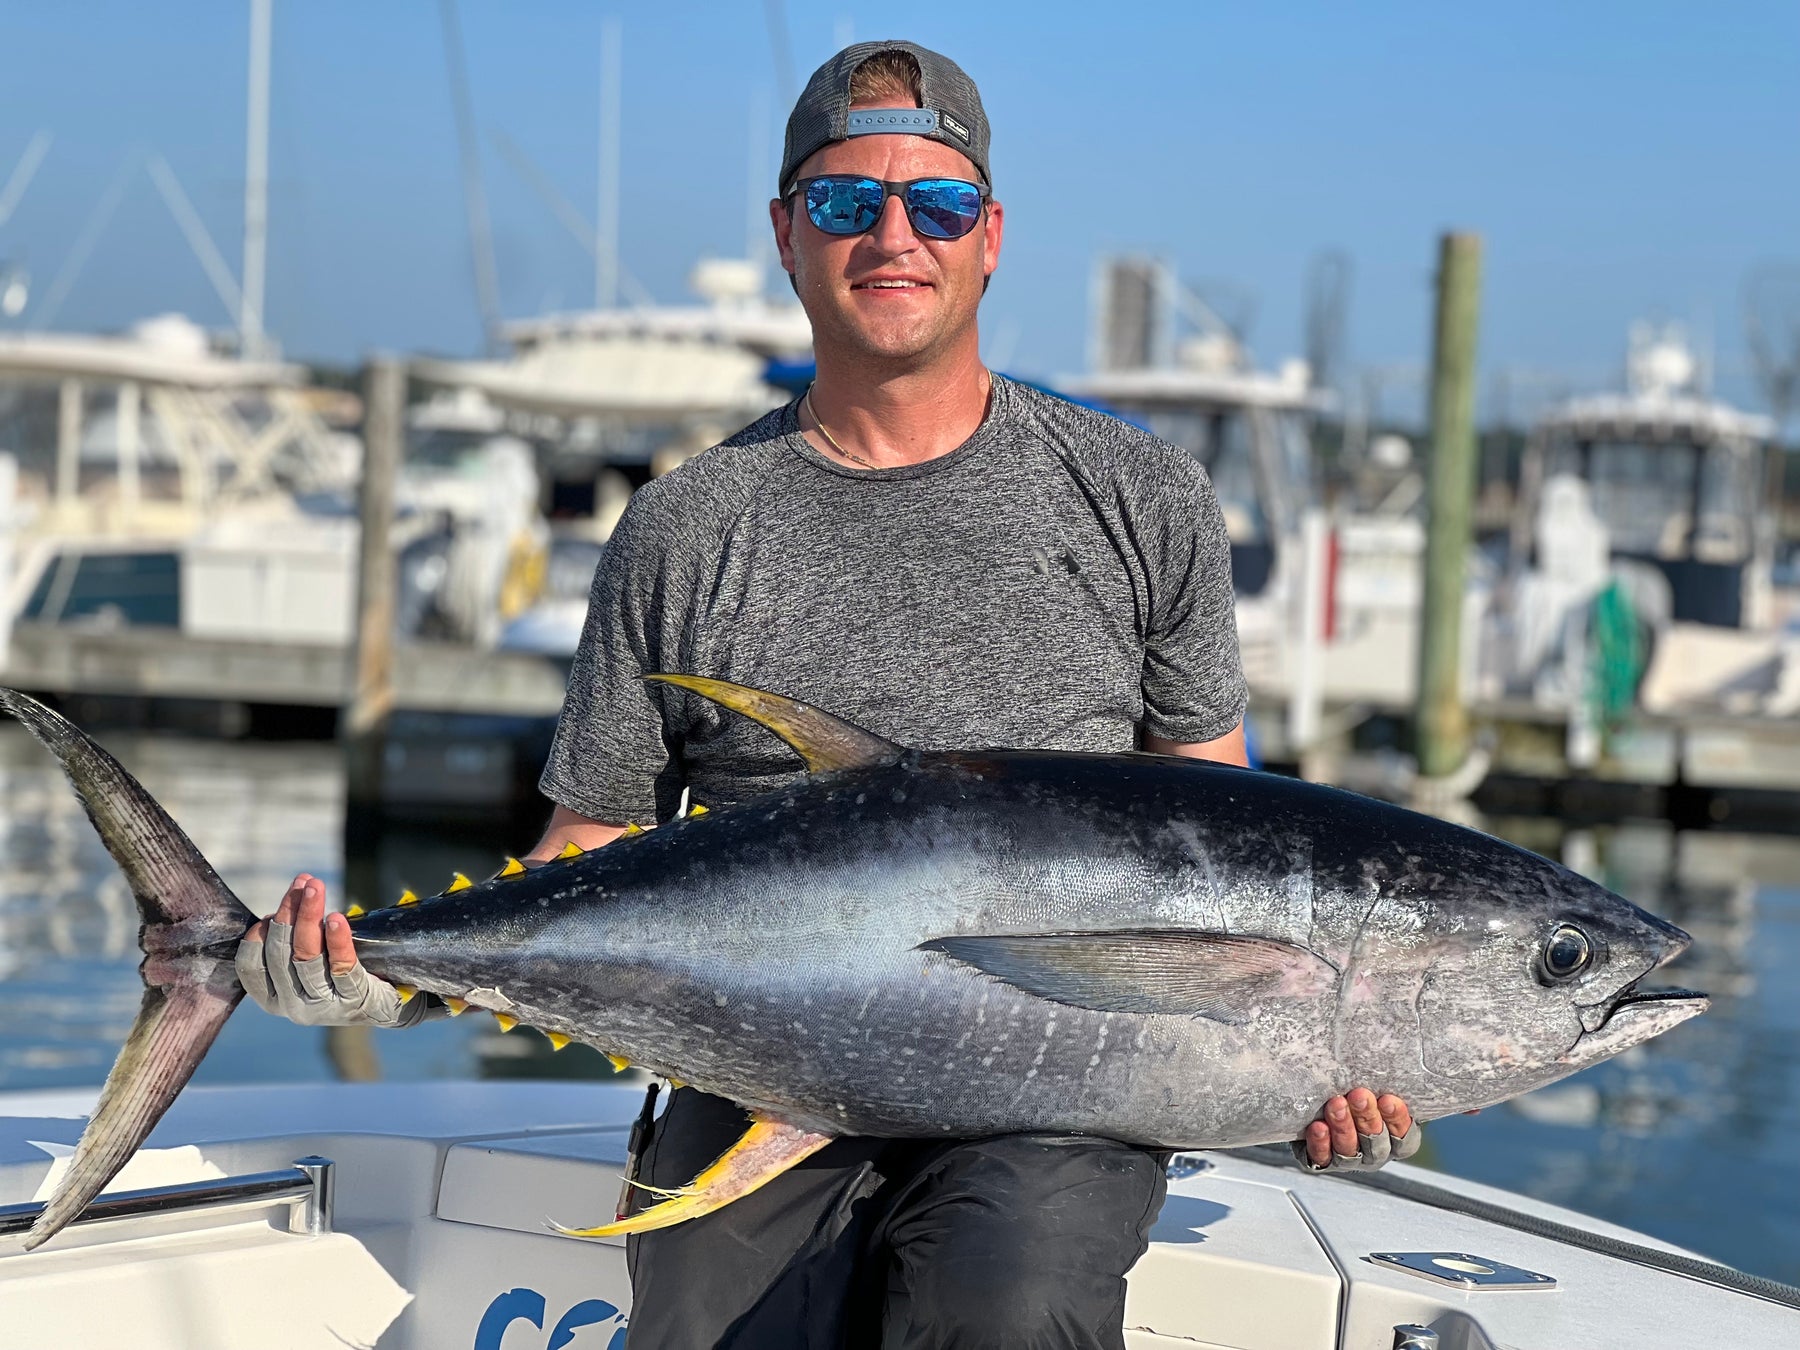 September 6th - TUNA ARE HOT!